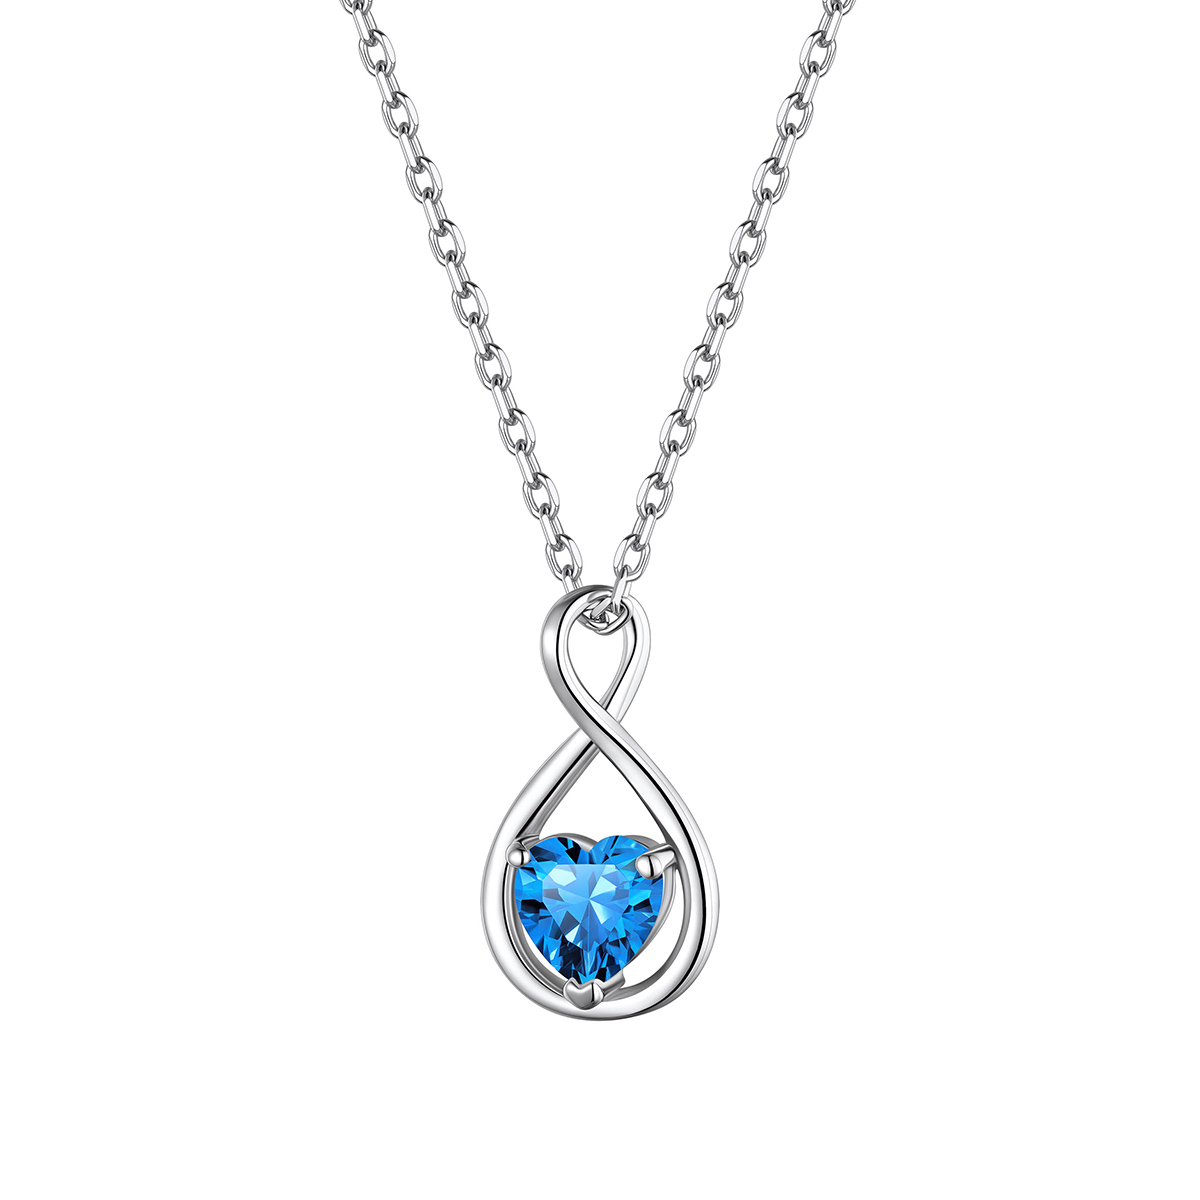 ChicSilver Heart Infinity Birthstone Necklace Sterling Silver